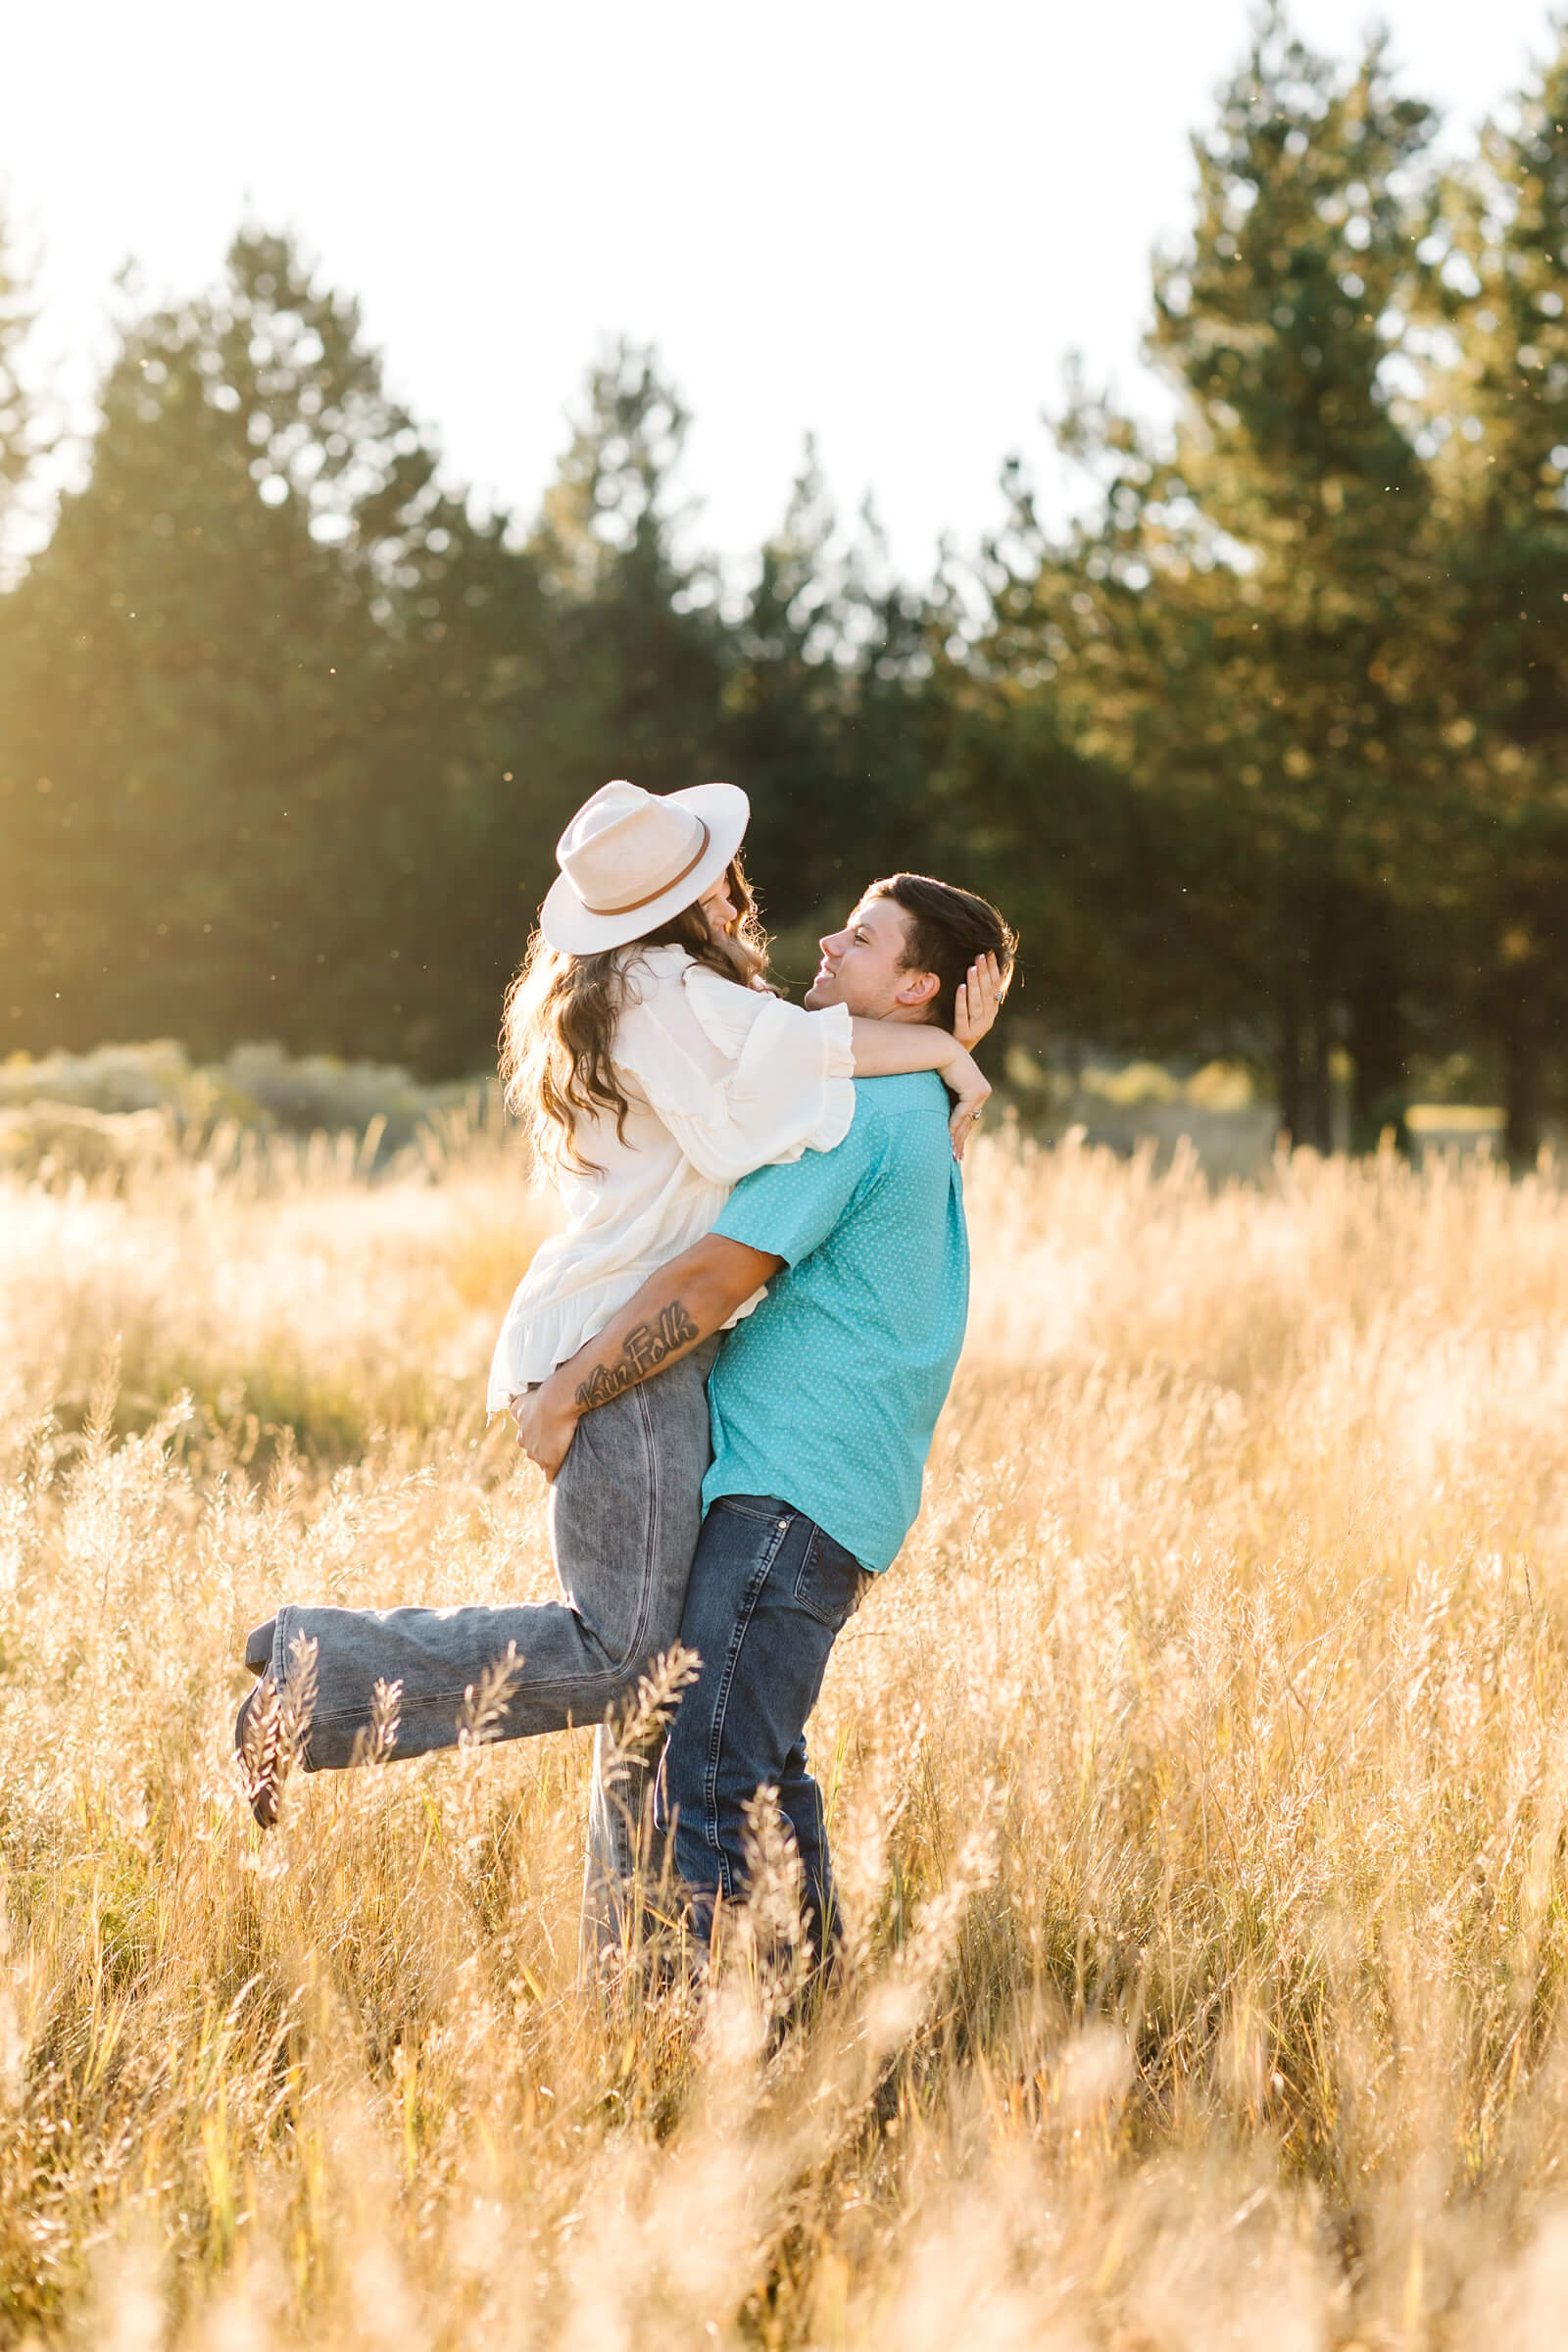 brunette male in teal button up lifting girl while in golden hay field as she looks at him